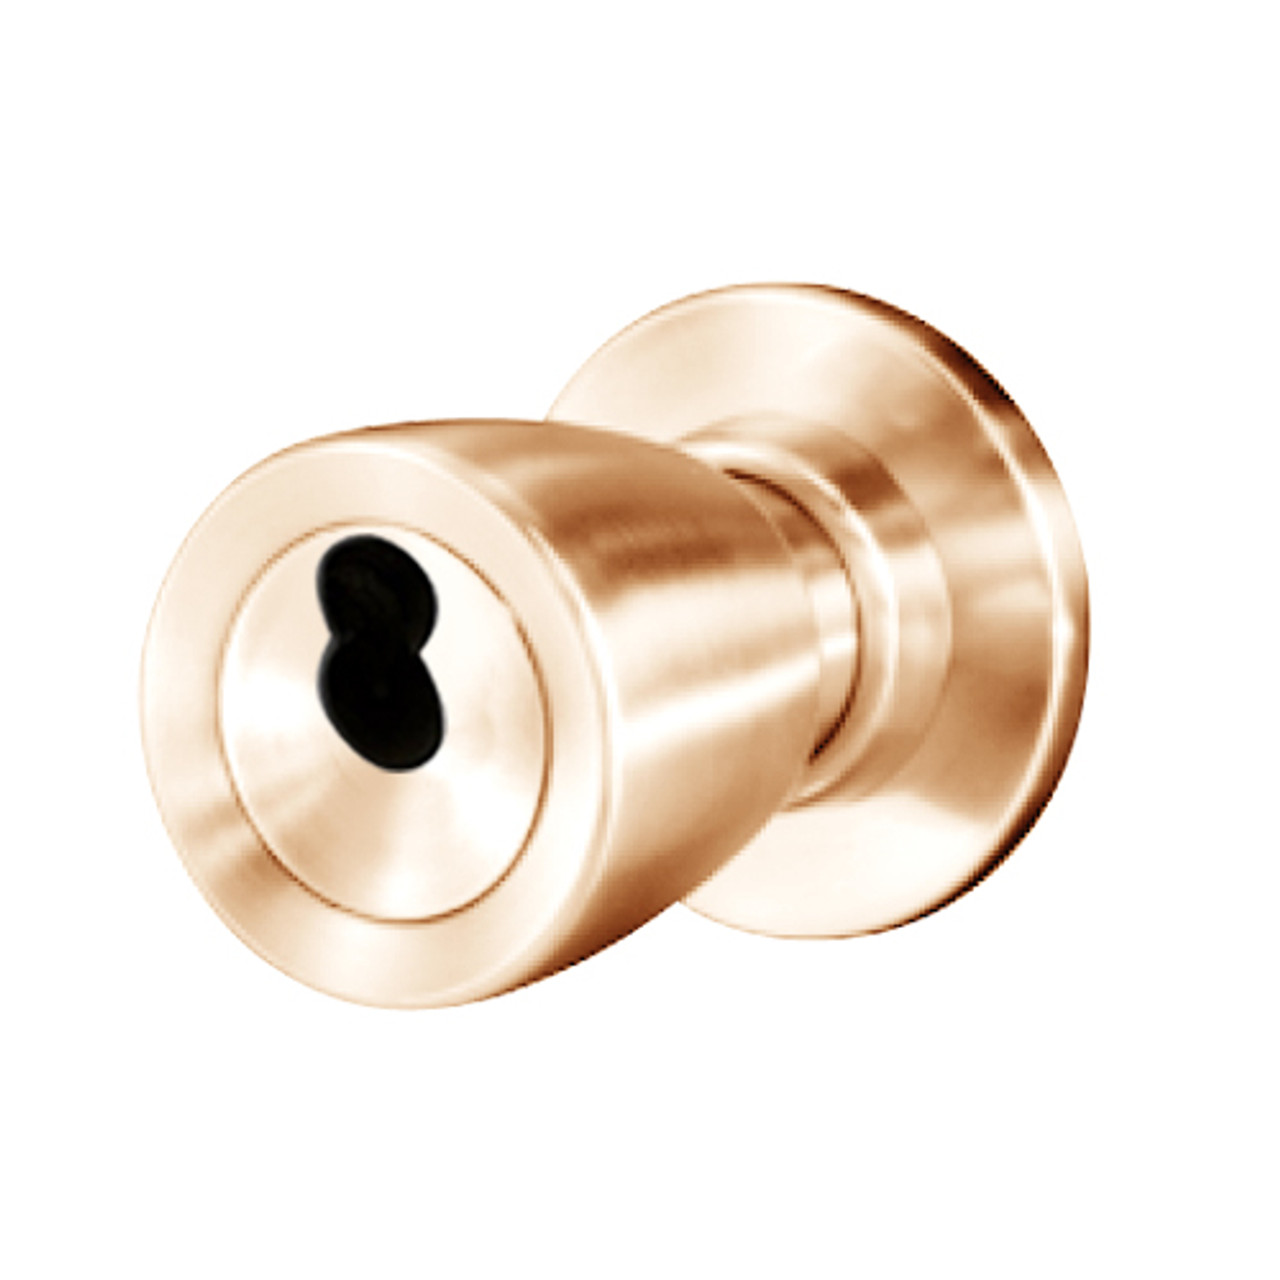 8K37XR6CS3611 Best 8K Series Special Heavy Duty Cylindrical Knob Locks with Tulip Style in Bright Bronze